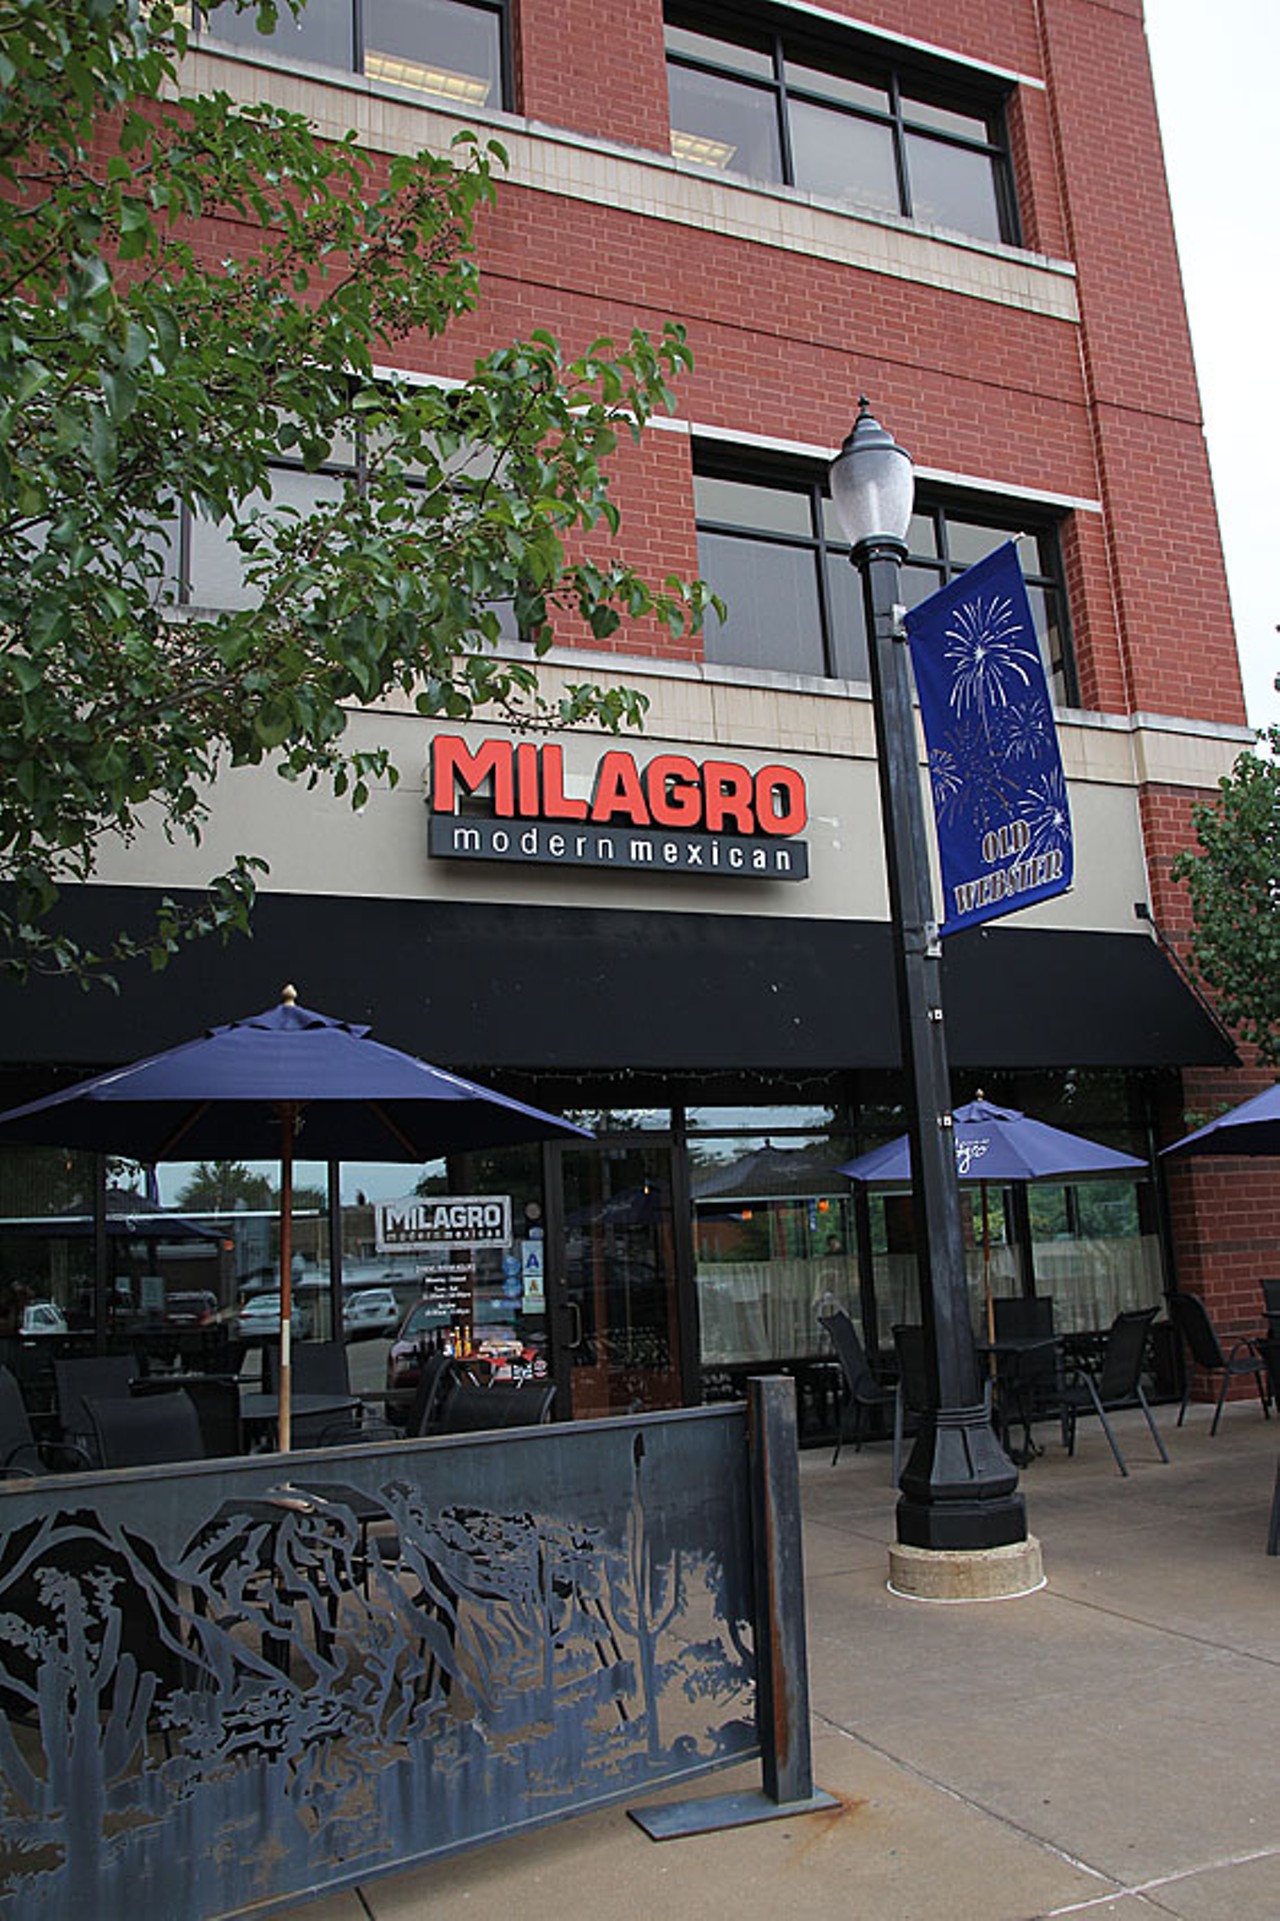 Milagro Modern Mexican (20 Allen Avenue, Webster Groves; 314-962-4300)
Boasting something a little different, Milagro offers thoughtful and unique presentations of traditional and contemporary Mexican fare. Favorites include the roast chicken smothered in a complex mole poblano, mahi mahi in a bright mole verde or salmon simply dressed in a salsa of mango, cilantro and annatto oil. Simple dishes spiced-up in creative ways, like the Huitlacoche, a Mexican delicacy, add to the fantastic quesadillas tradicionales. Another standout is a tostada appetizer featuring pulled duck meat in a blood orange habanero sauce. Oh, and the top-shelf margarita is topnotch with the tequila of your choice (Don Julio, Patron, Tres Generaciones or Rio Azul), shaken with agave nectar and freshly squeezed lime juice.